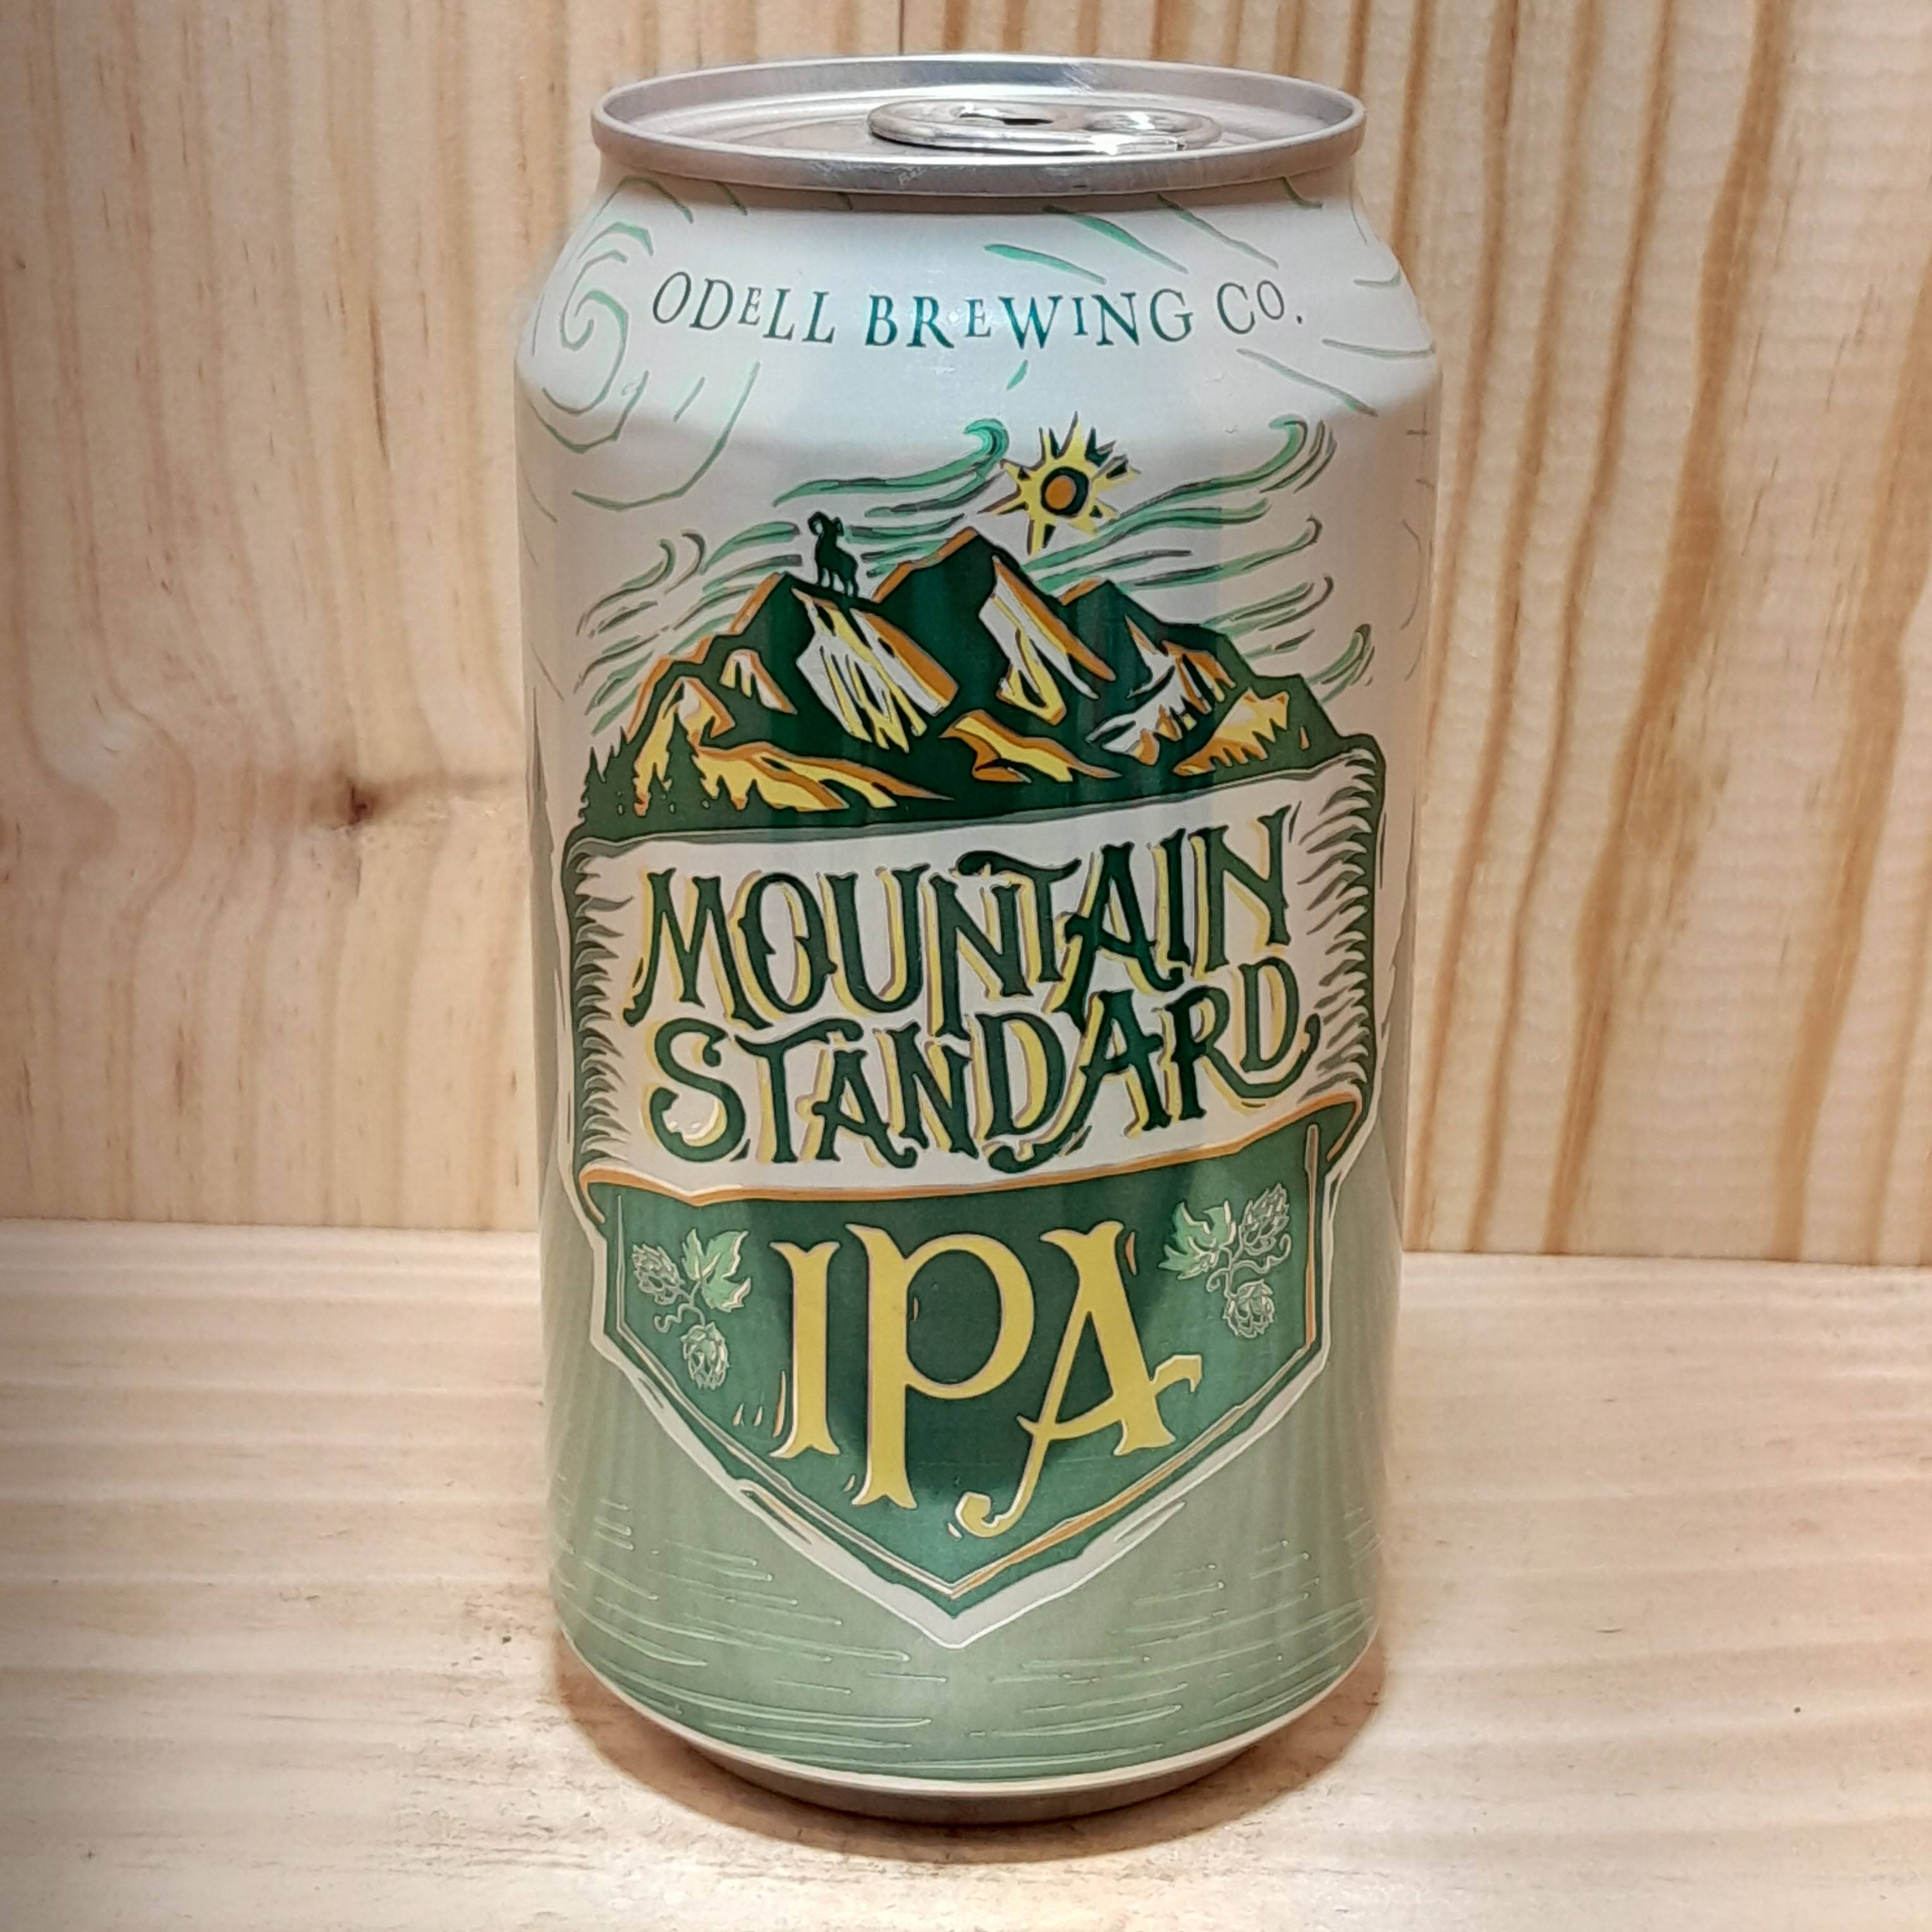 Odell Brewing Mountain Standard Ipa (12oz can)